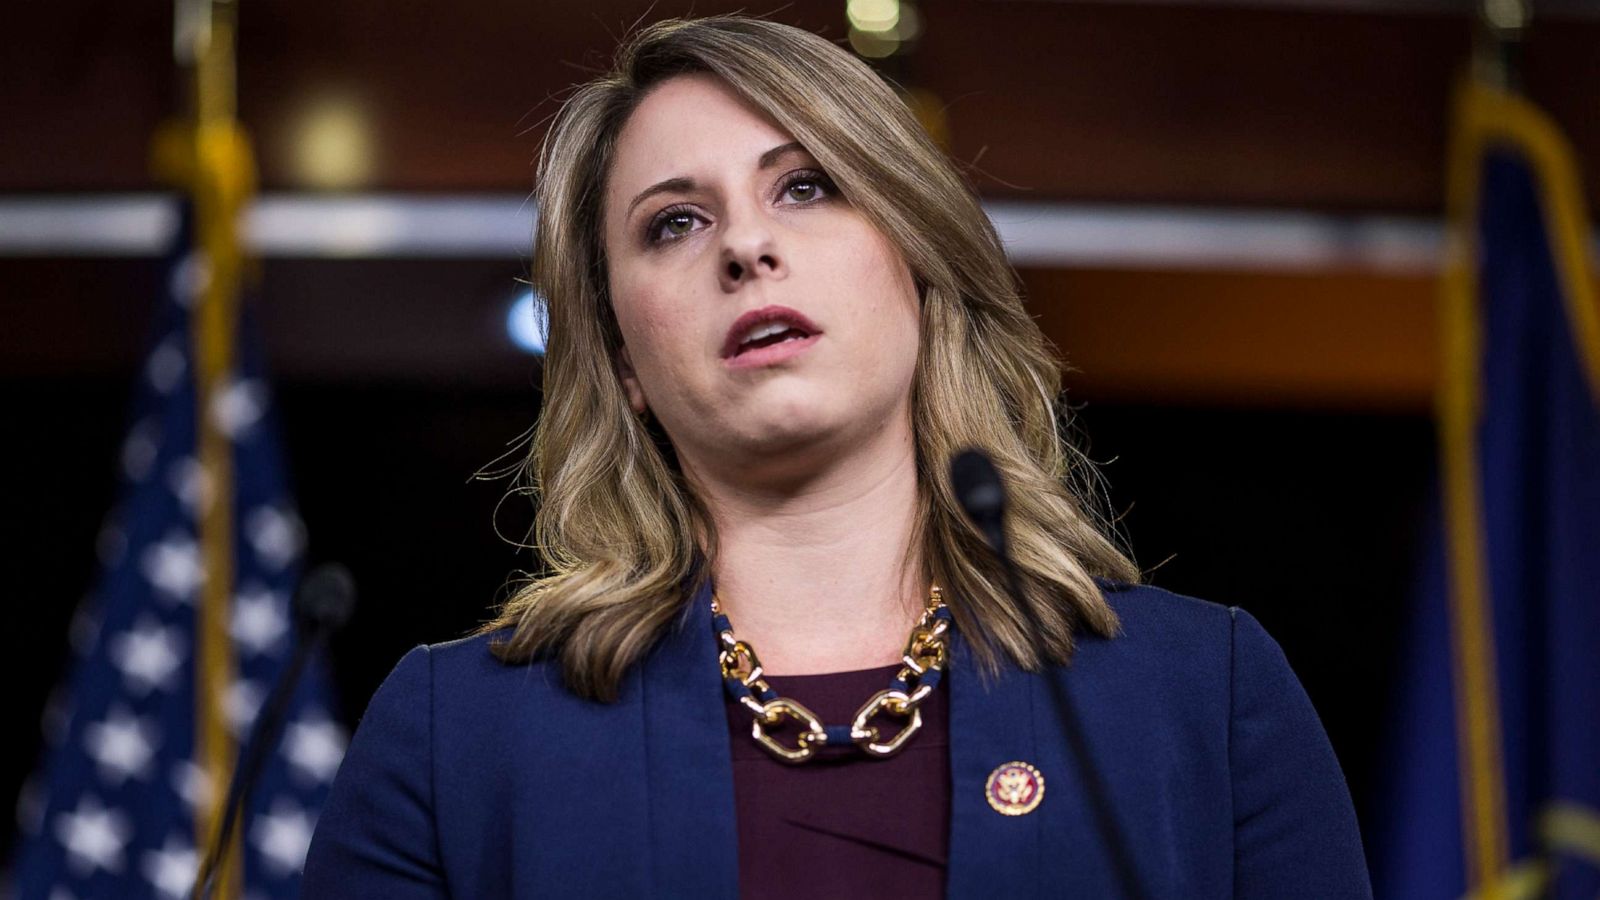 In video, Rep. Katie Hill blames 'Republican opponents' and 'abusive  husband' for resignation - ABC News